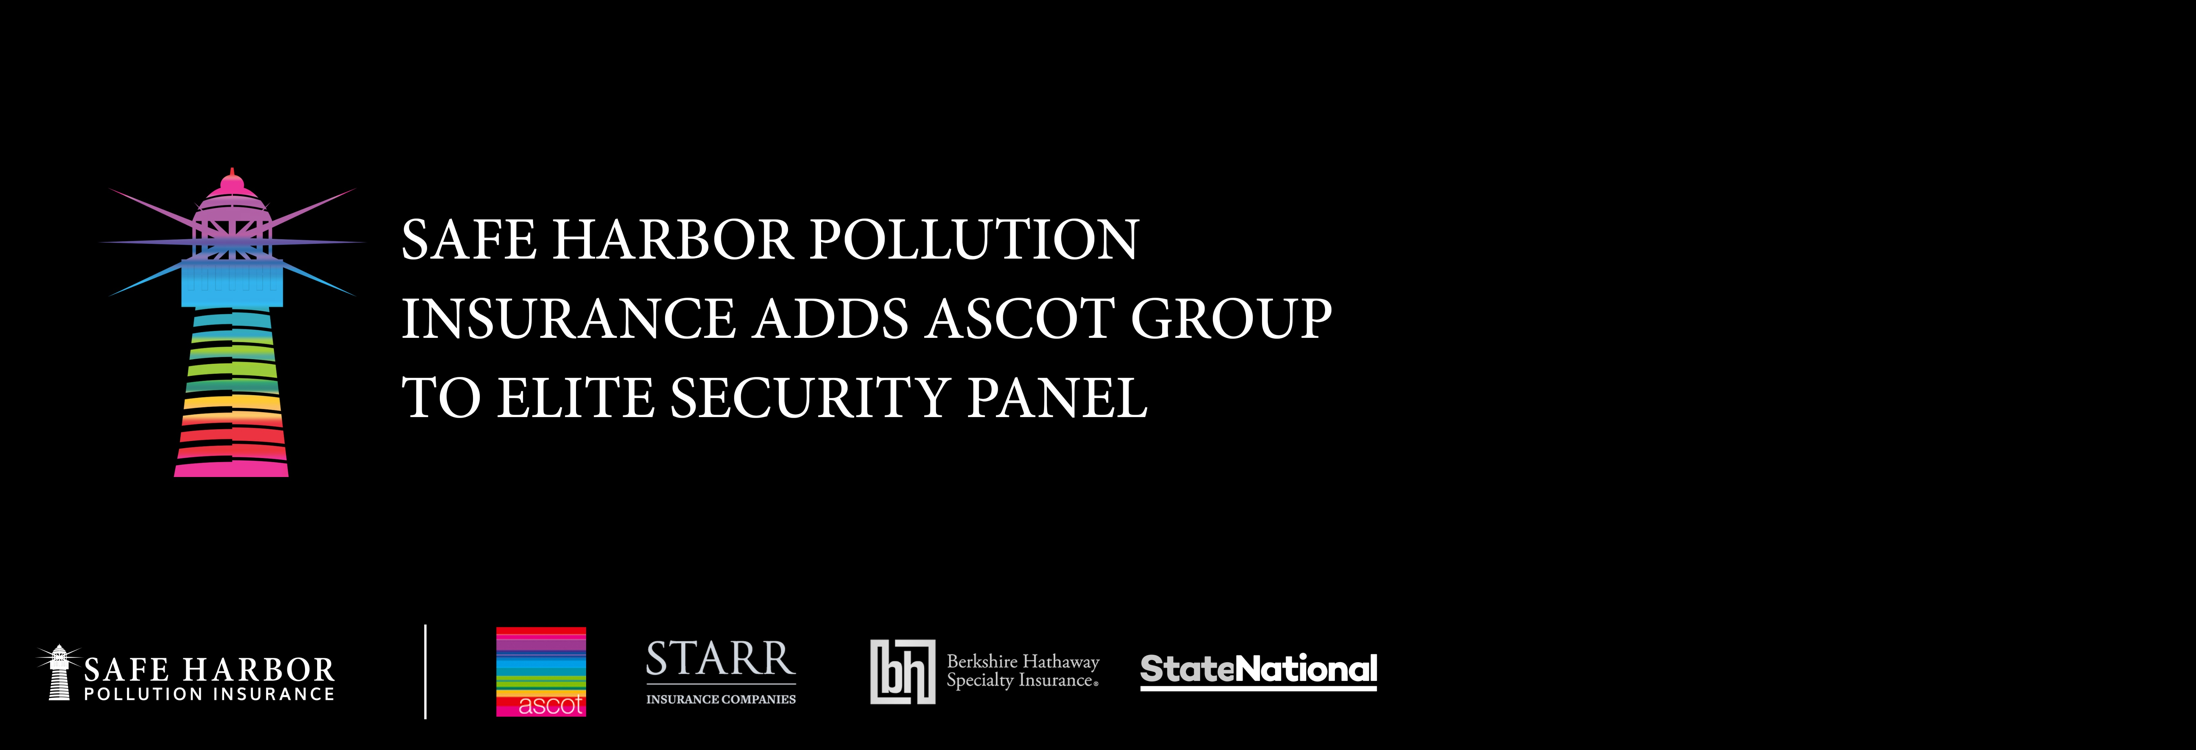 safe harbor pollution insurance adds ascot group to elite security panel banner